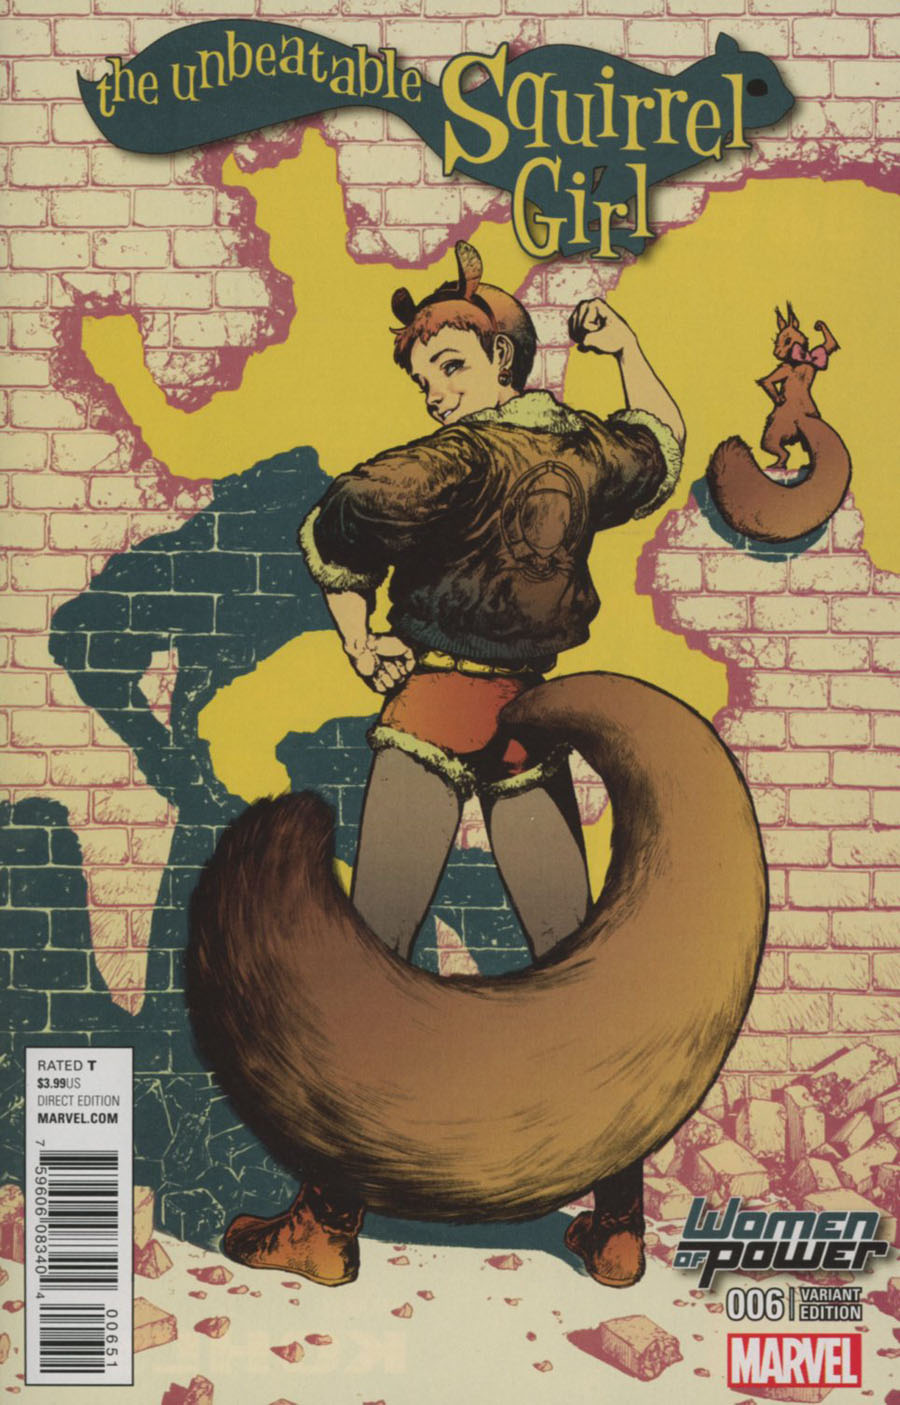 Unbeatable Squirrel Girl Vol 2 #6 Cover B Variant Women Of Power Cover (Animal House Part 1)